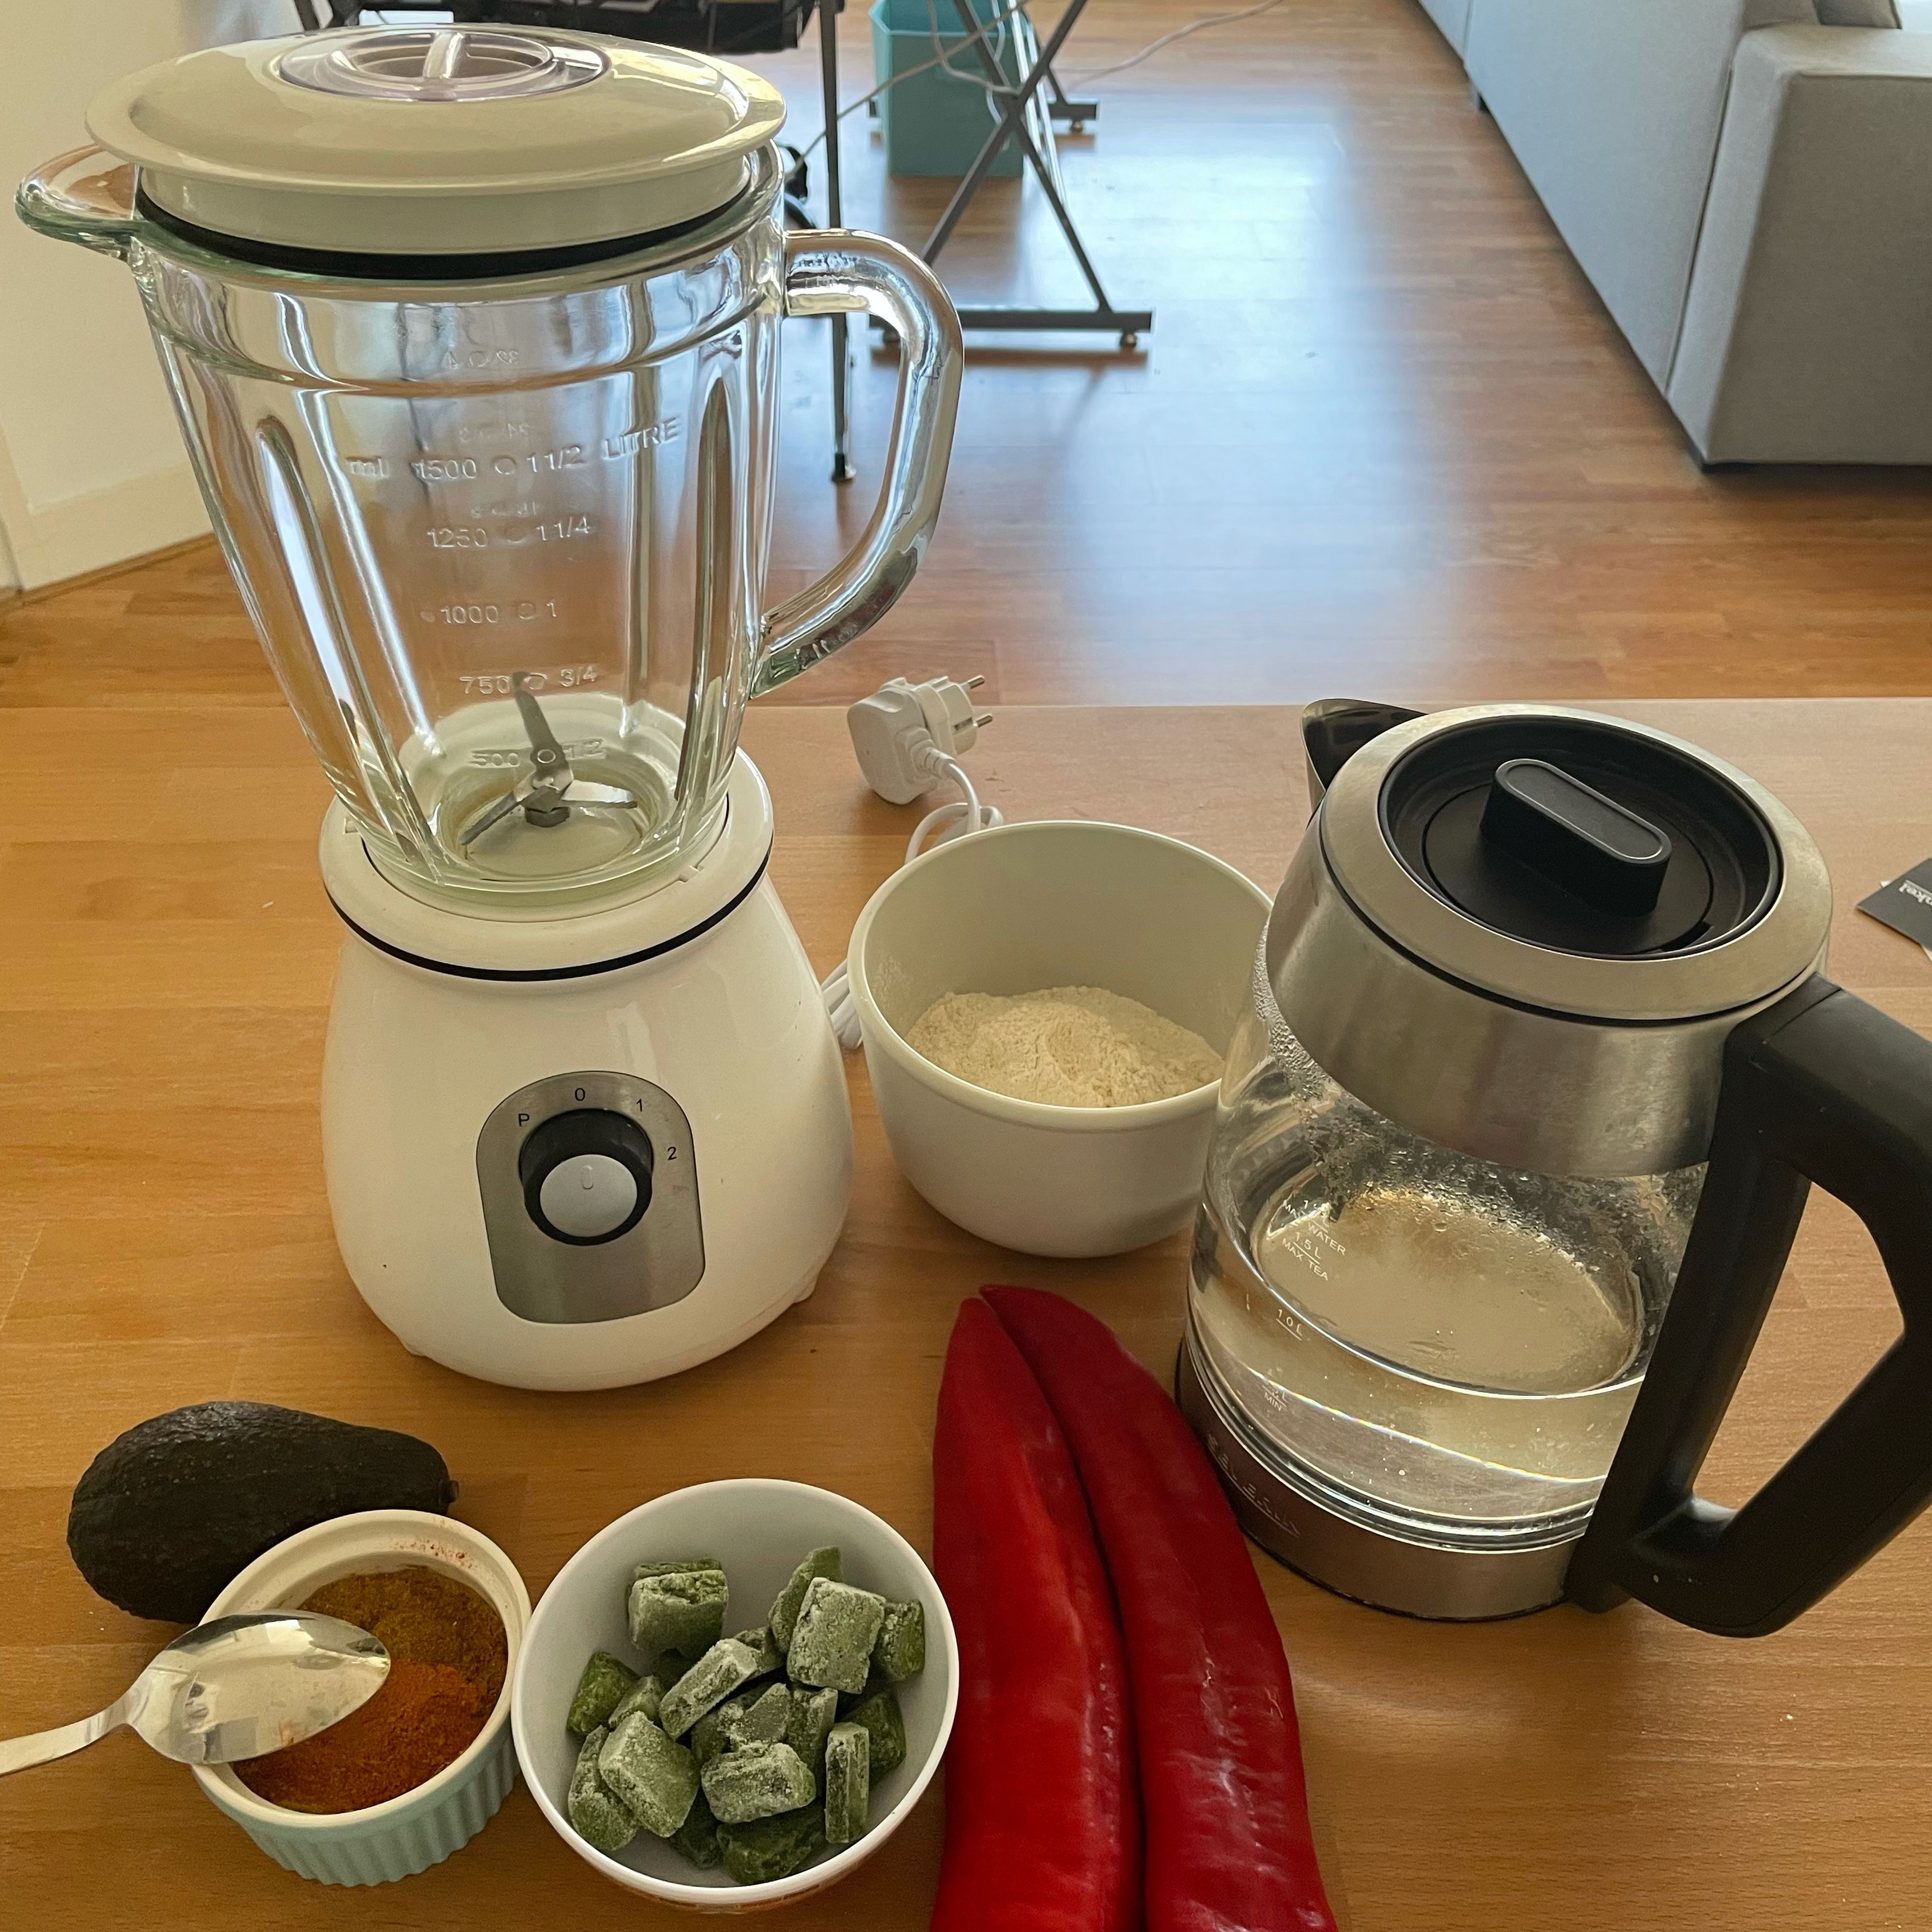 Blend the peppers avocado and onions first. Add the water to blend easily. Add the beans flour and blend till a smooth paste is achieved. Add your preferred seasoning for flavor. You can also add chopped spinach.